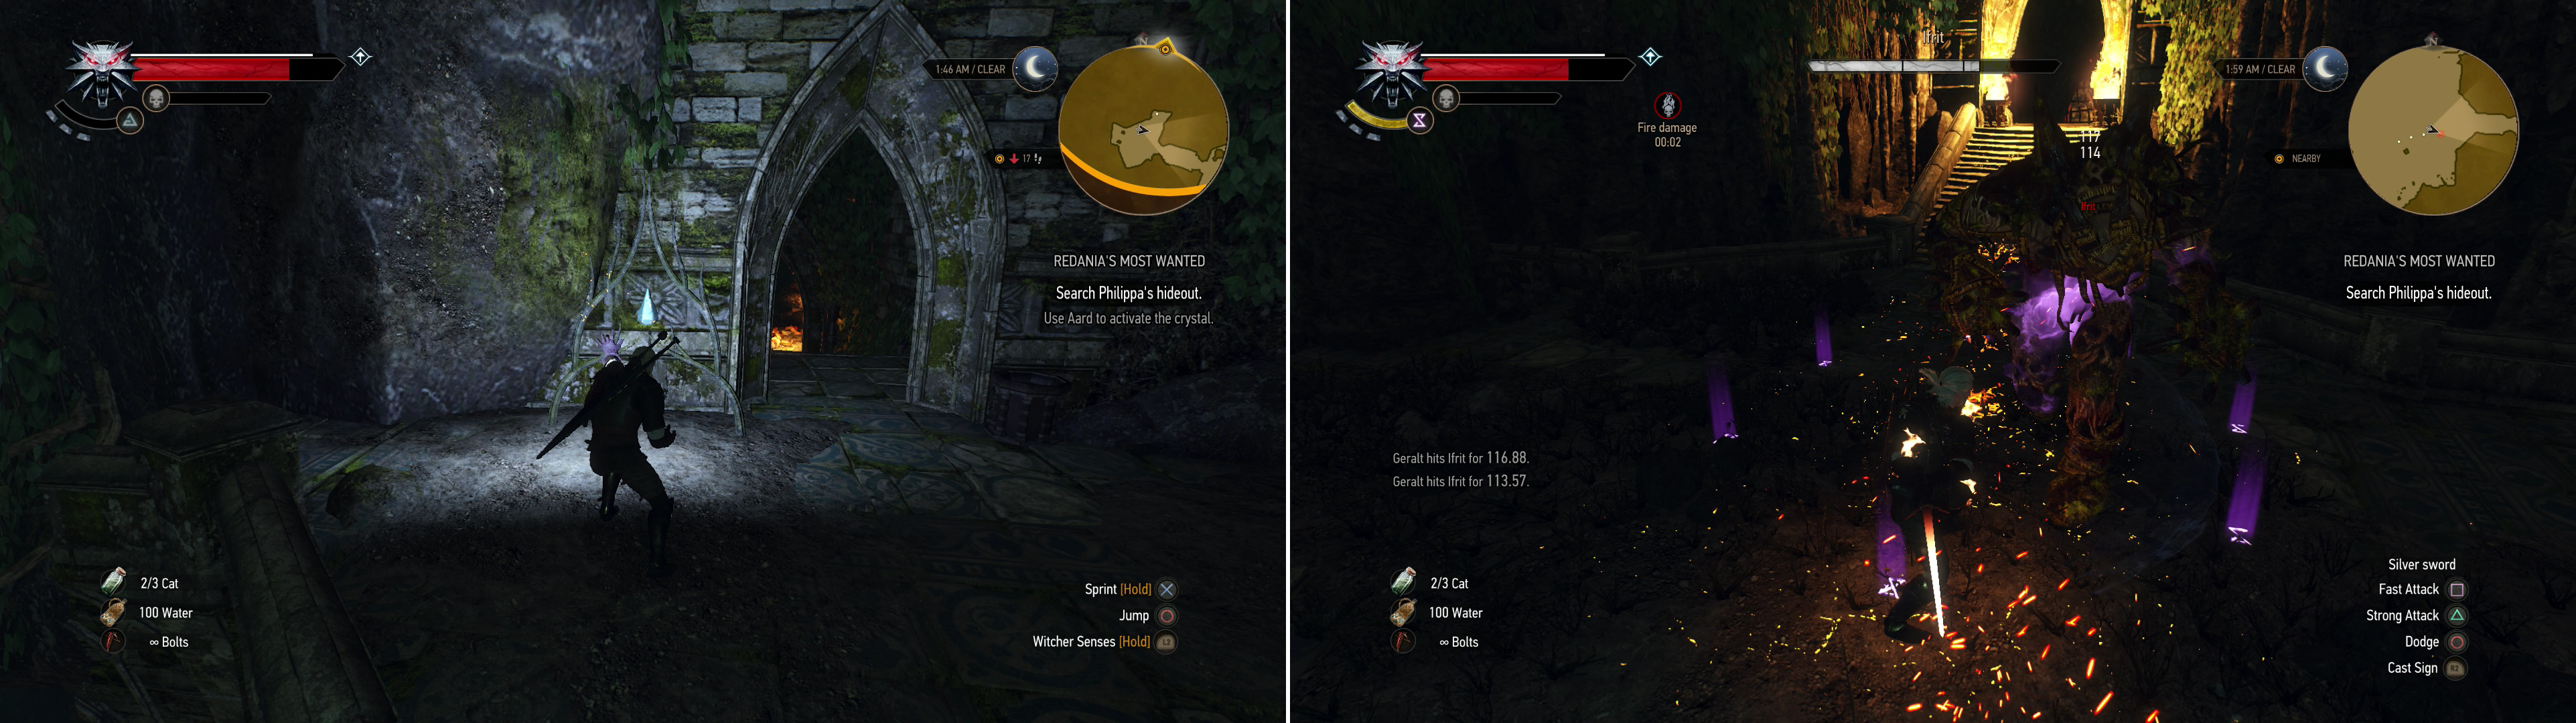 Charge up power crystals by hitting them with the Aard Sign (left). Guarding Phillipa’s lab is an Ifrit (right).